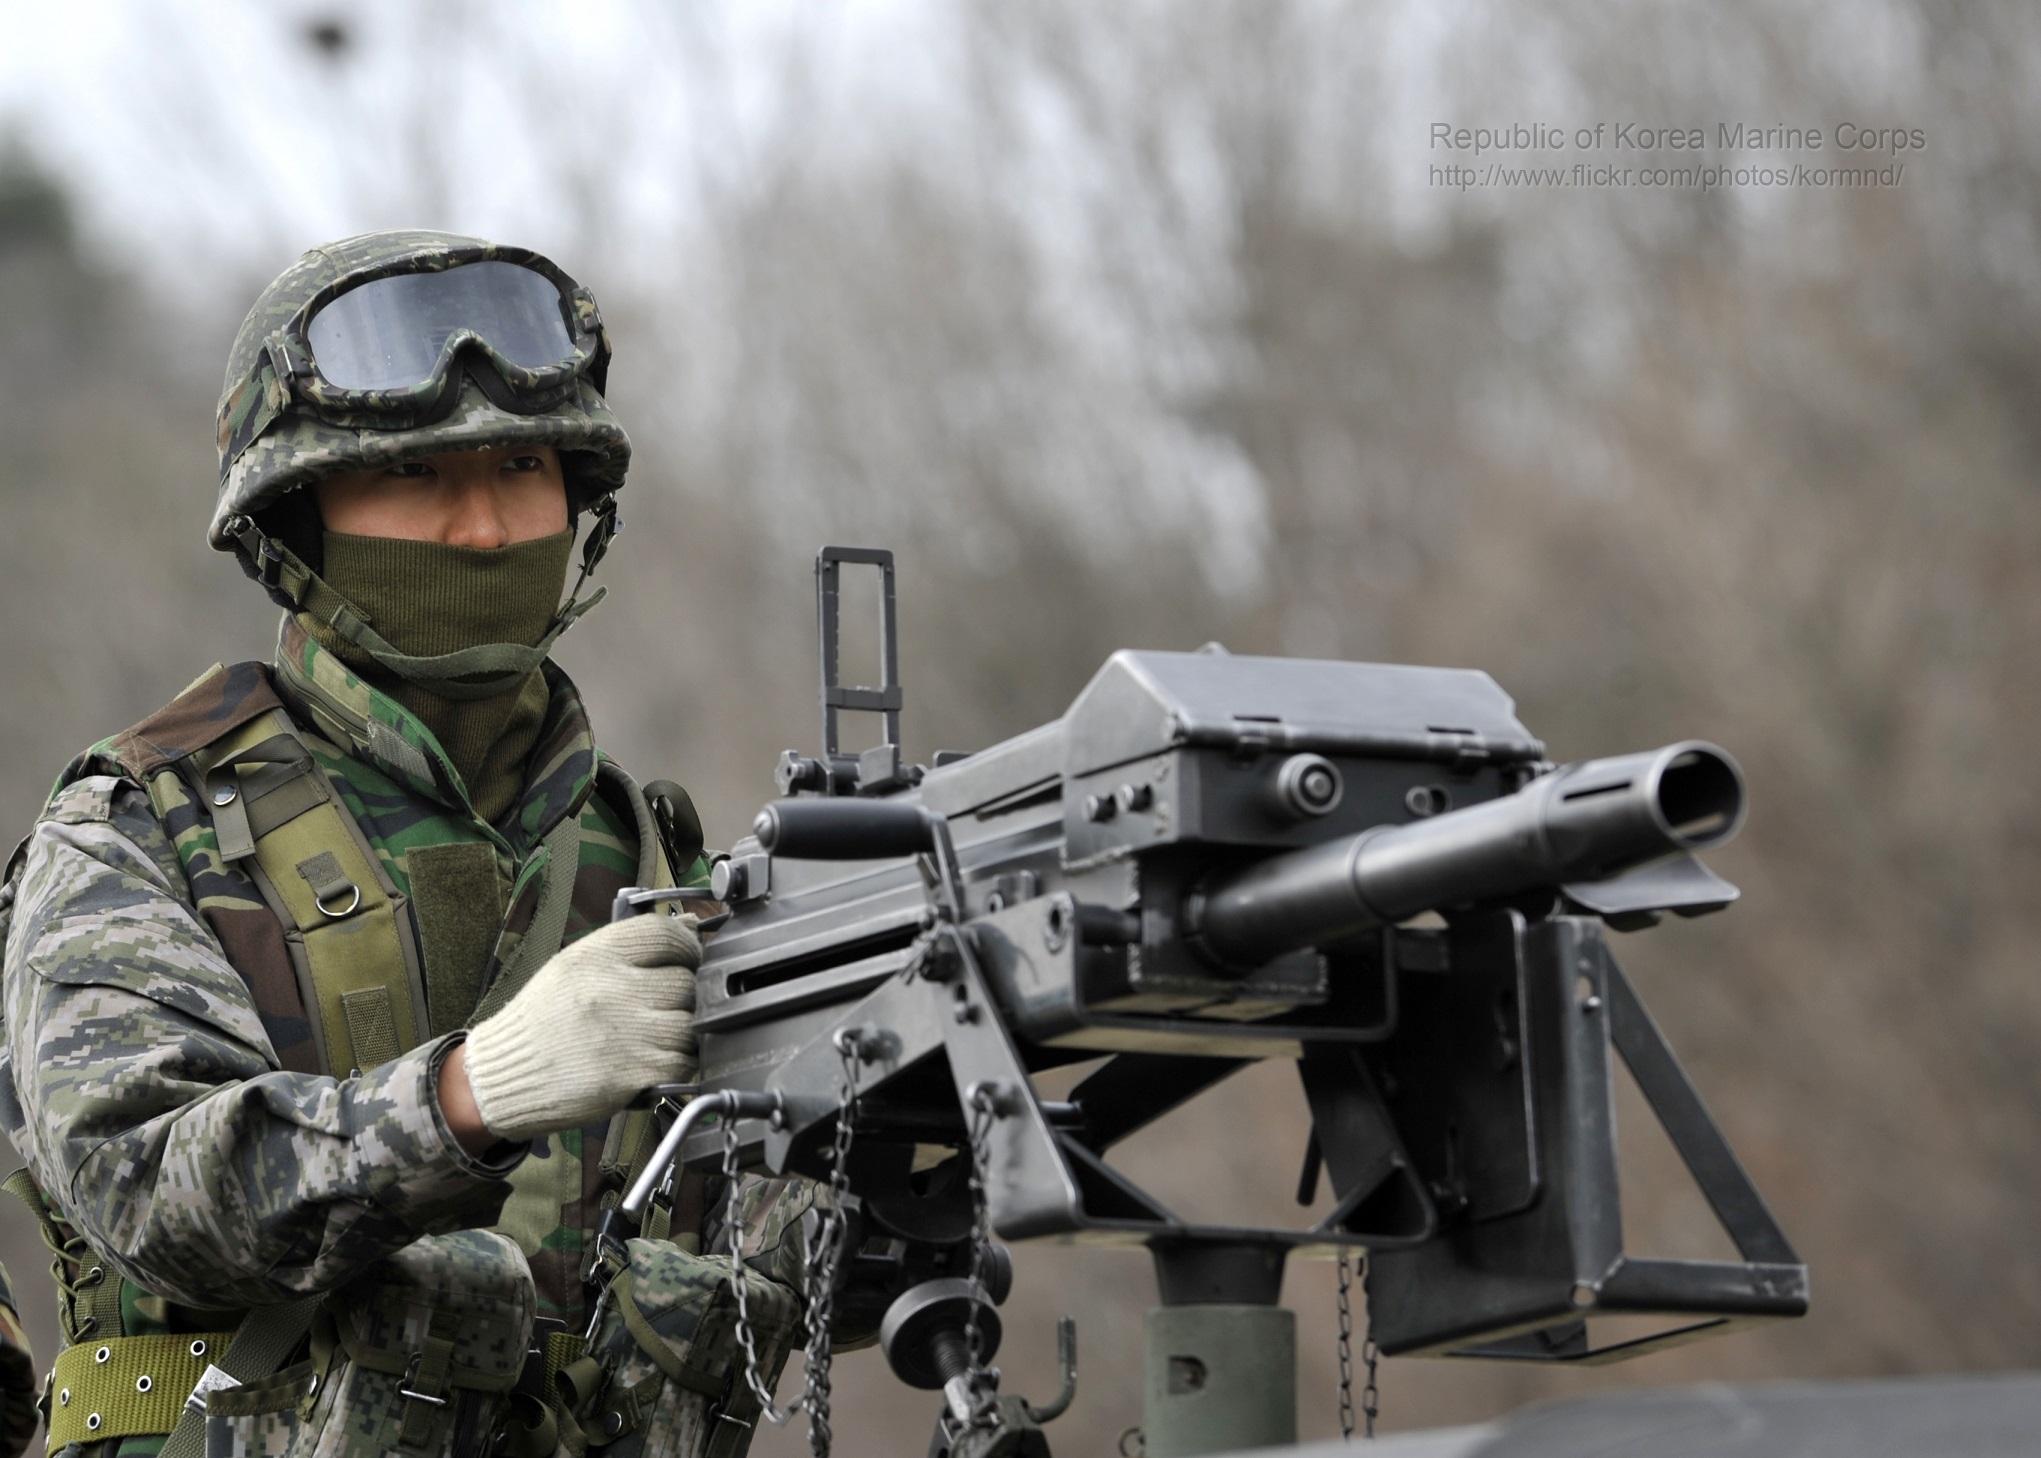 Not only K2 Black Panther tanks, K9 Thunder howitzers and FA-50 aircraft: Poland buys K4 grenade launchers and 500,000 rounds of ammunition from South Korea